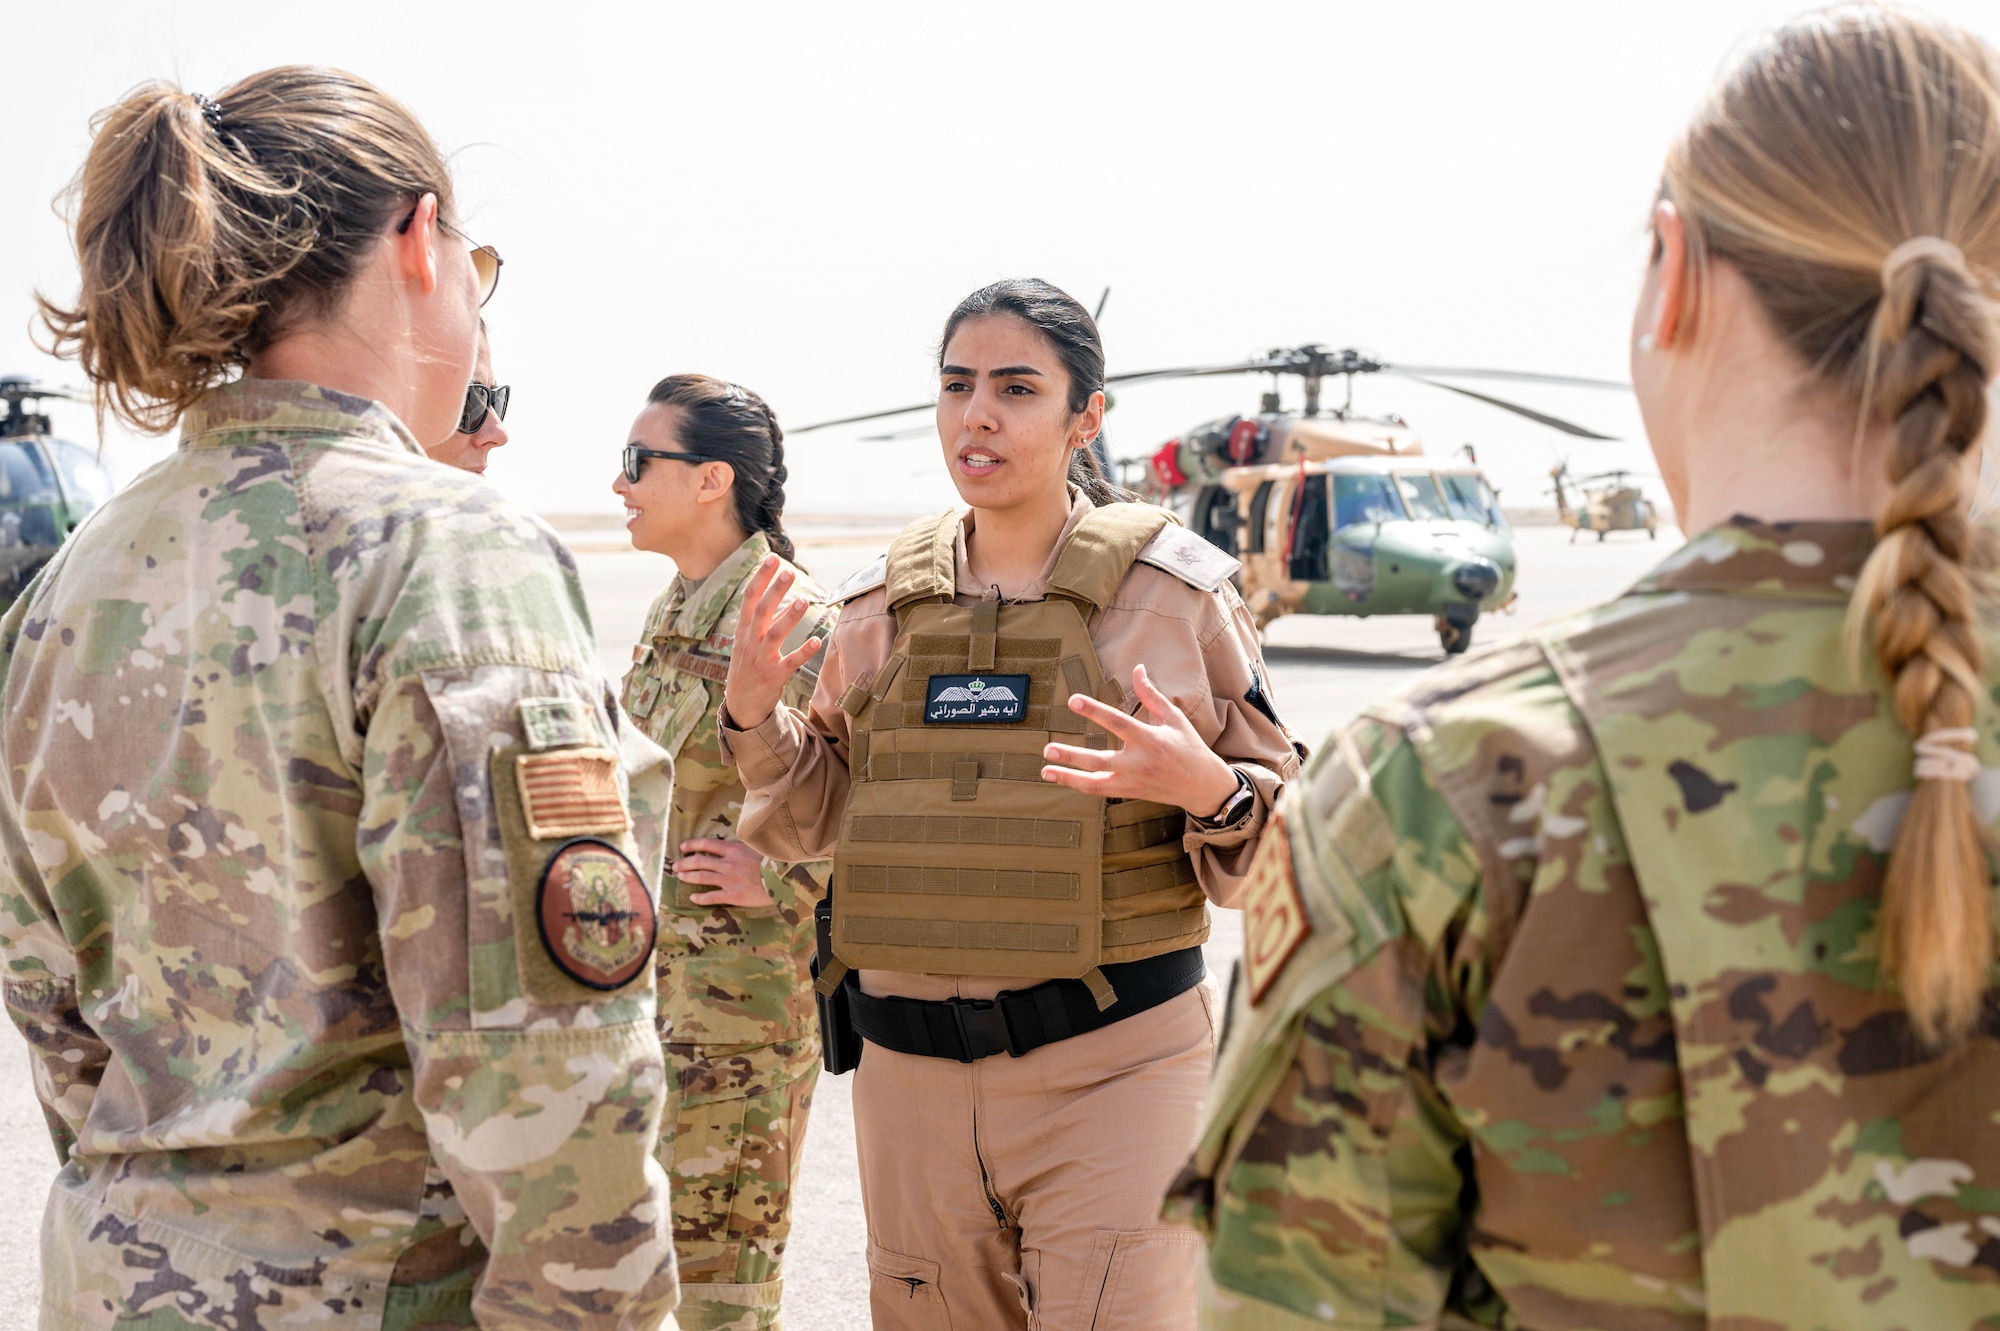 Lieutenant Aya Al-Sourani, Royal Jordanian Air Force Unified Helicopter Command Squadron 8 UH-60 Black Hawk pilot, talks with U.S. Air Force visitors during a visit at King Abdullah II Air Base, Jordan on March 30, 2022. The RJAF UHC hosted a combat search and rescue exercise demonstration followed by static aircraft tours and a group lunch. The engagement is part of an ongoing partnership between the two countries focused on empowering women in aviation as a way to cultivate and strengthen relationships. (U.S. Air Force photo by Master Sgt. Kelly Goonan)